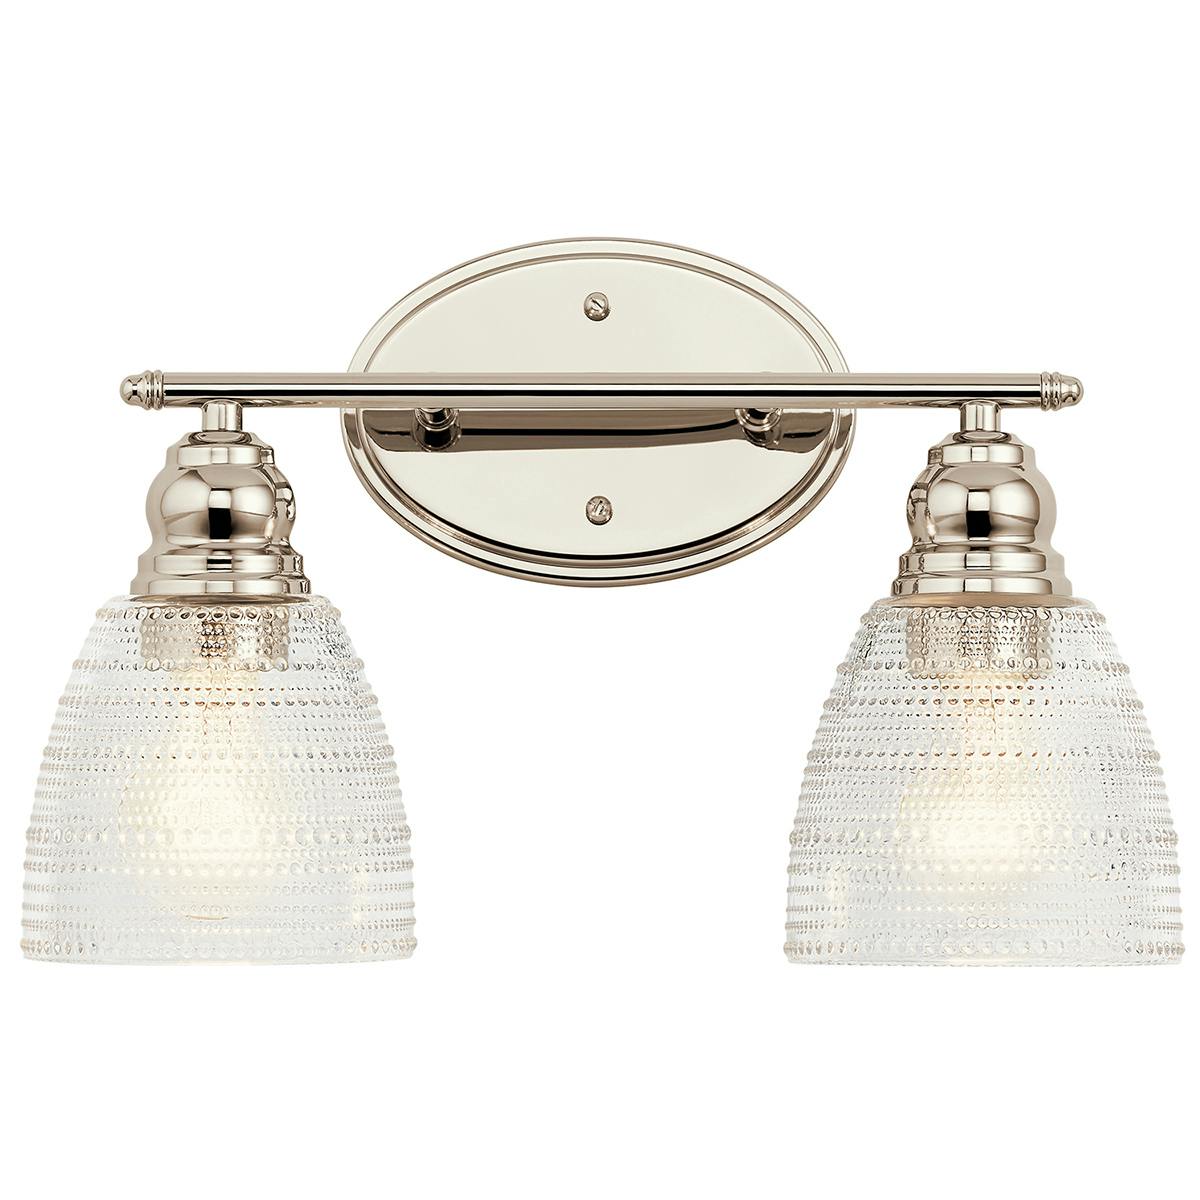 Front view of the Karmarie 2 Light Vanity Light Nickel on a white background